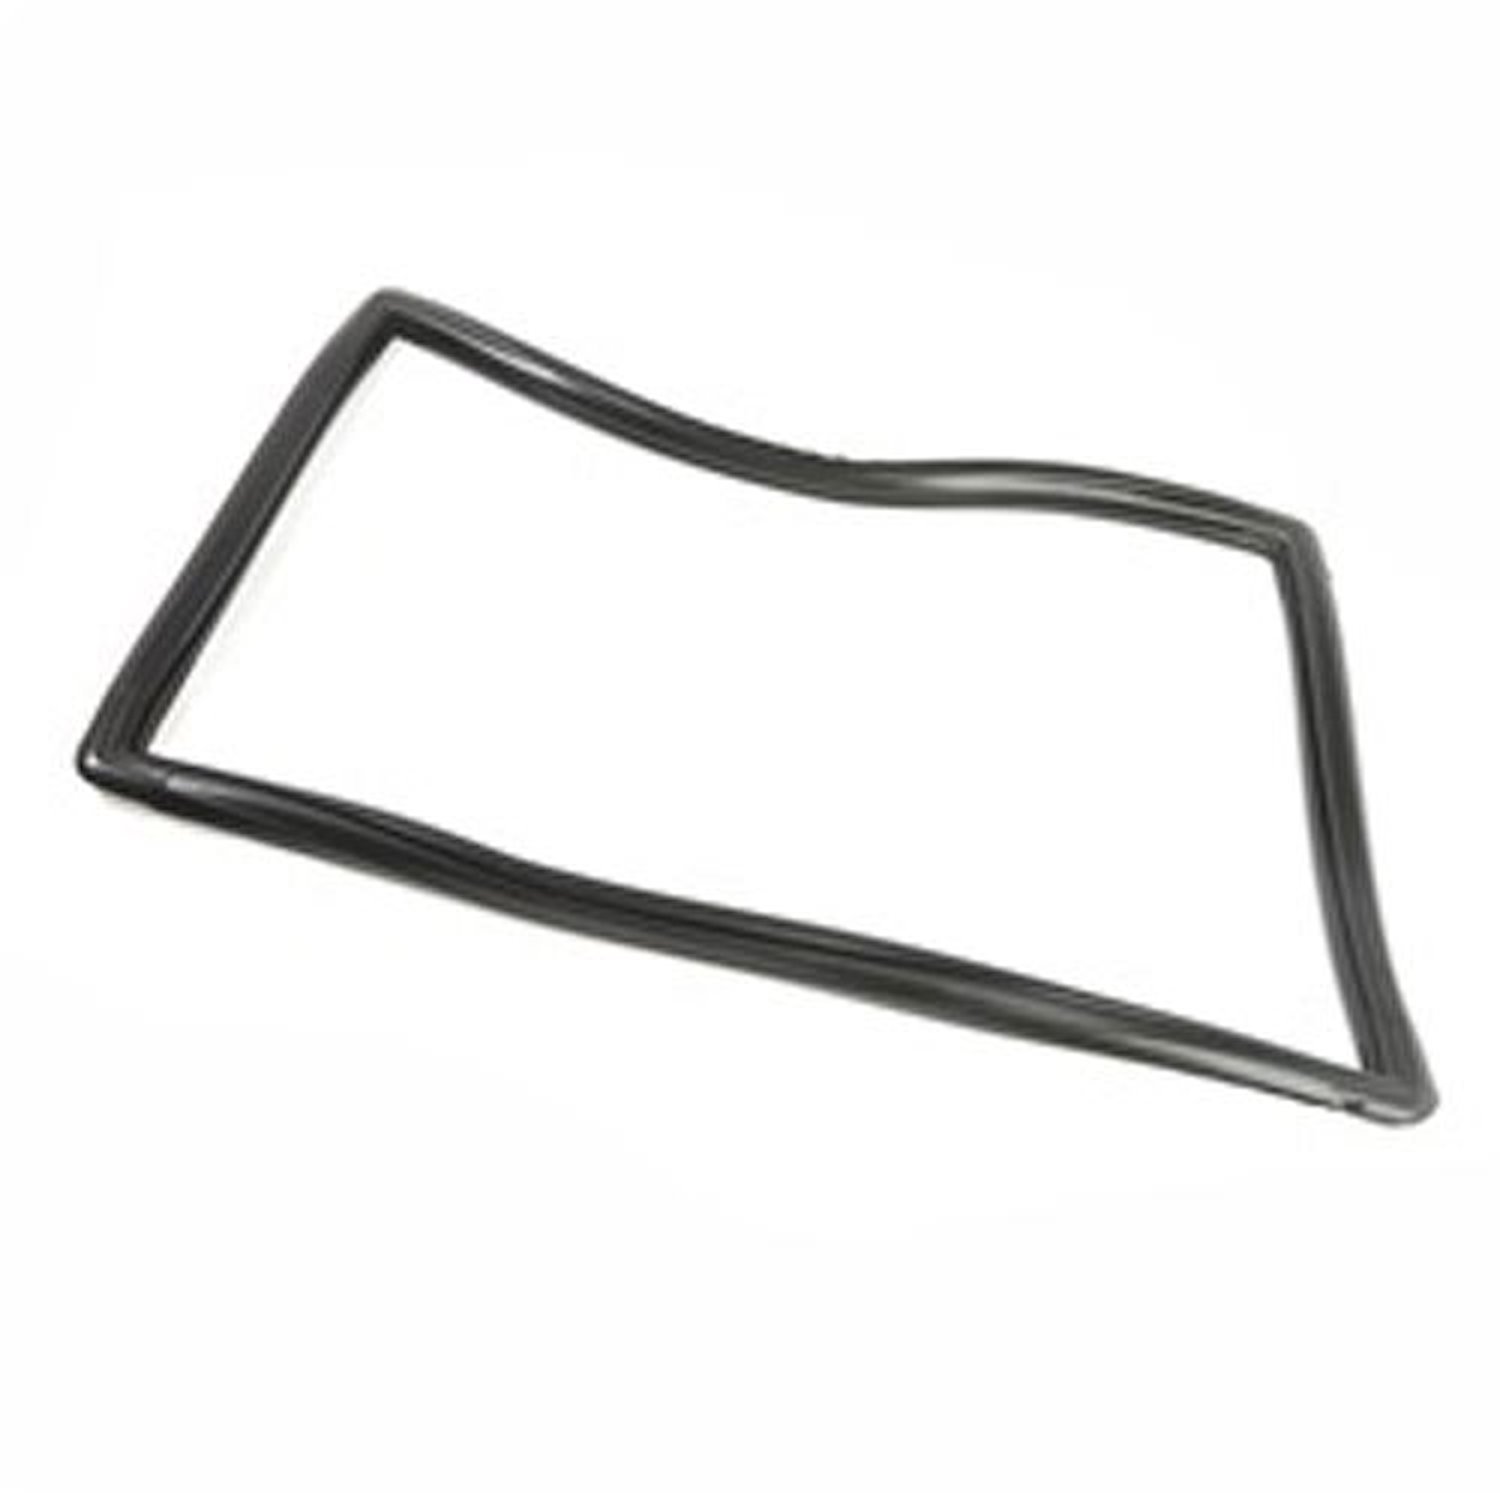 This left rear quarter window seal from Omix-ADA